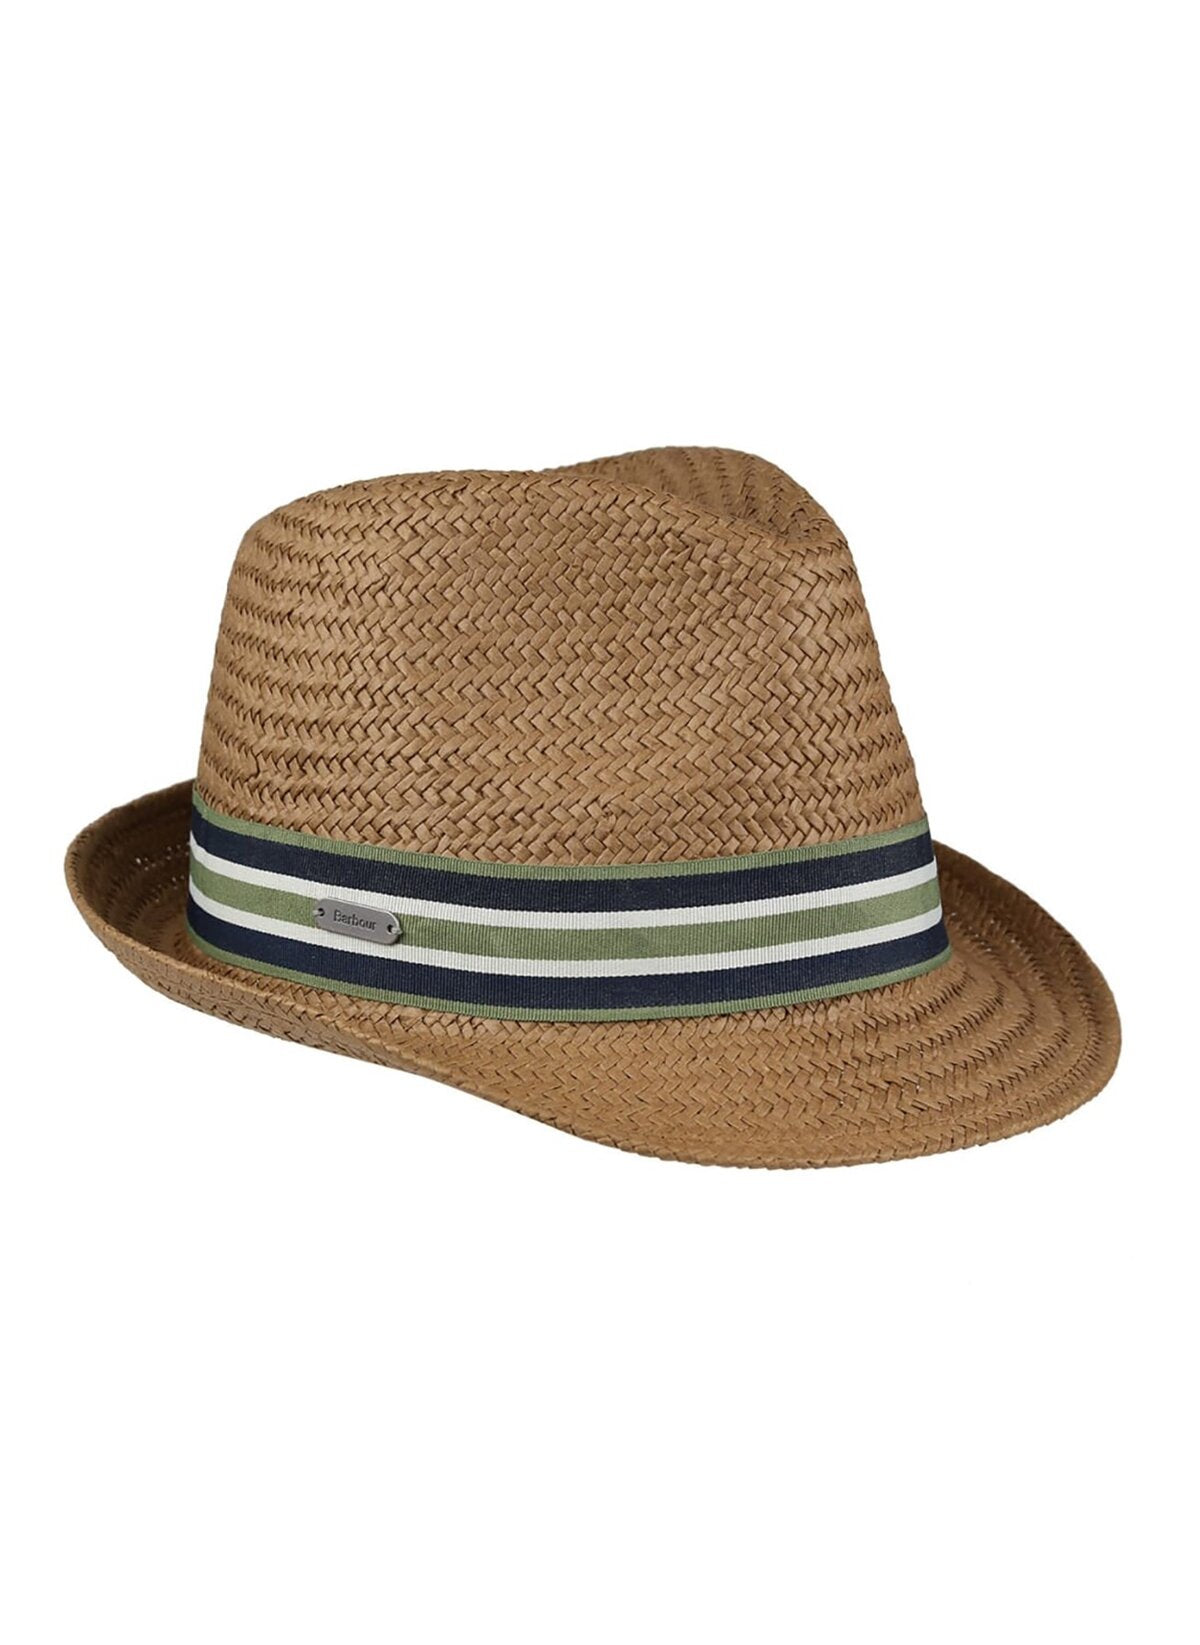 Barbour Whitby Trilby in Naturale / Marrone - Ideal Moda